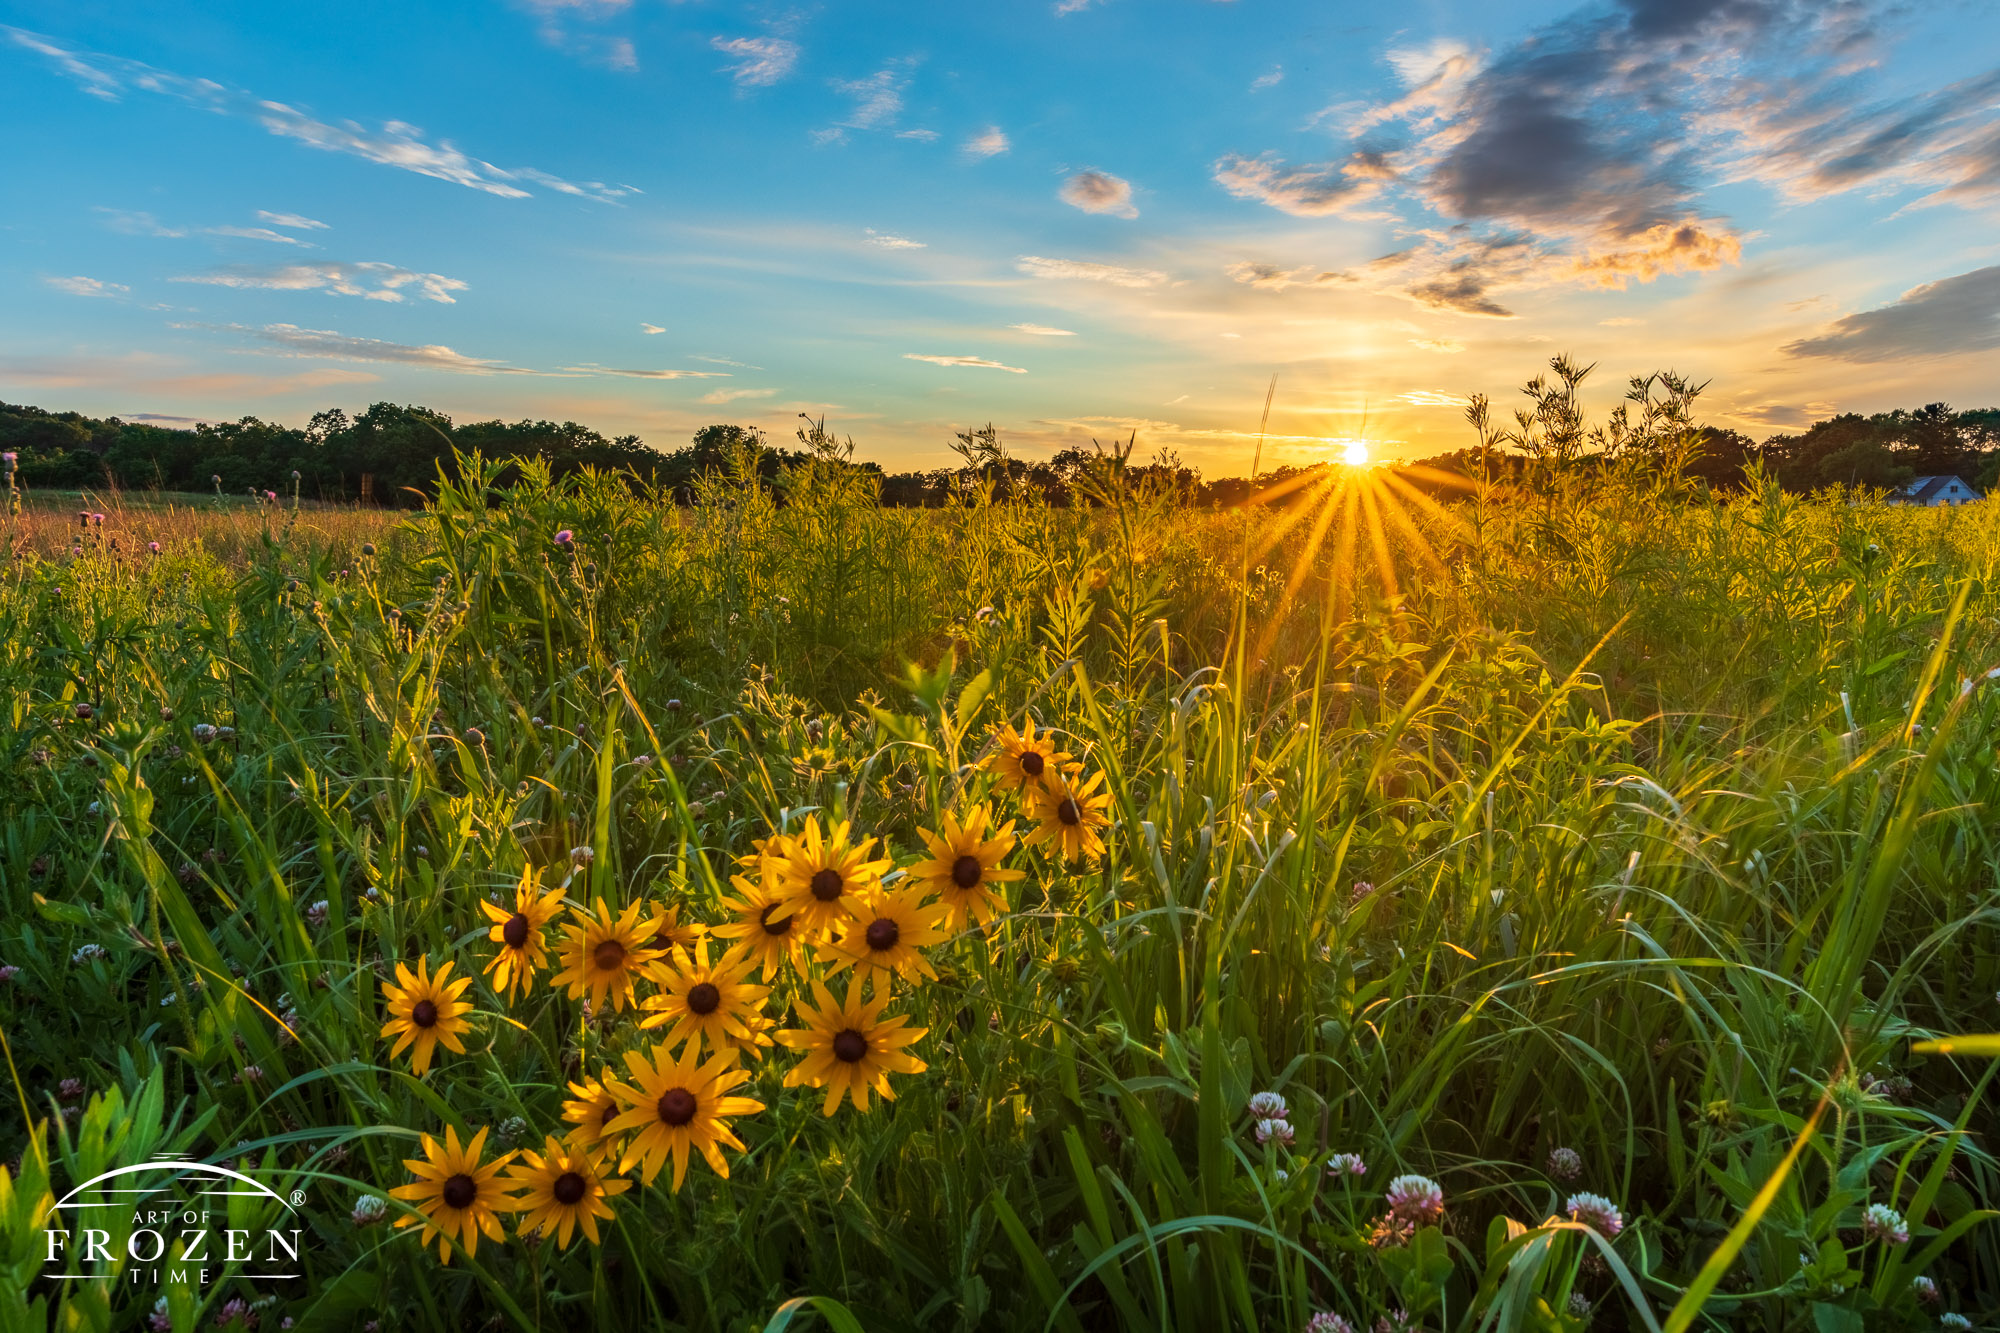 A patch of Black-eyed Susans basking in the evening light while mimicking the rays from the setting sun